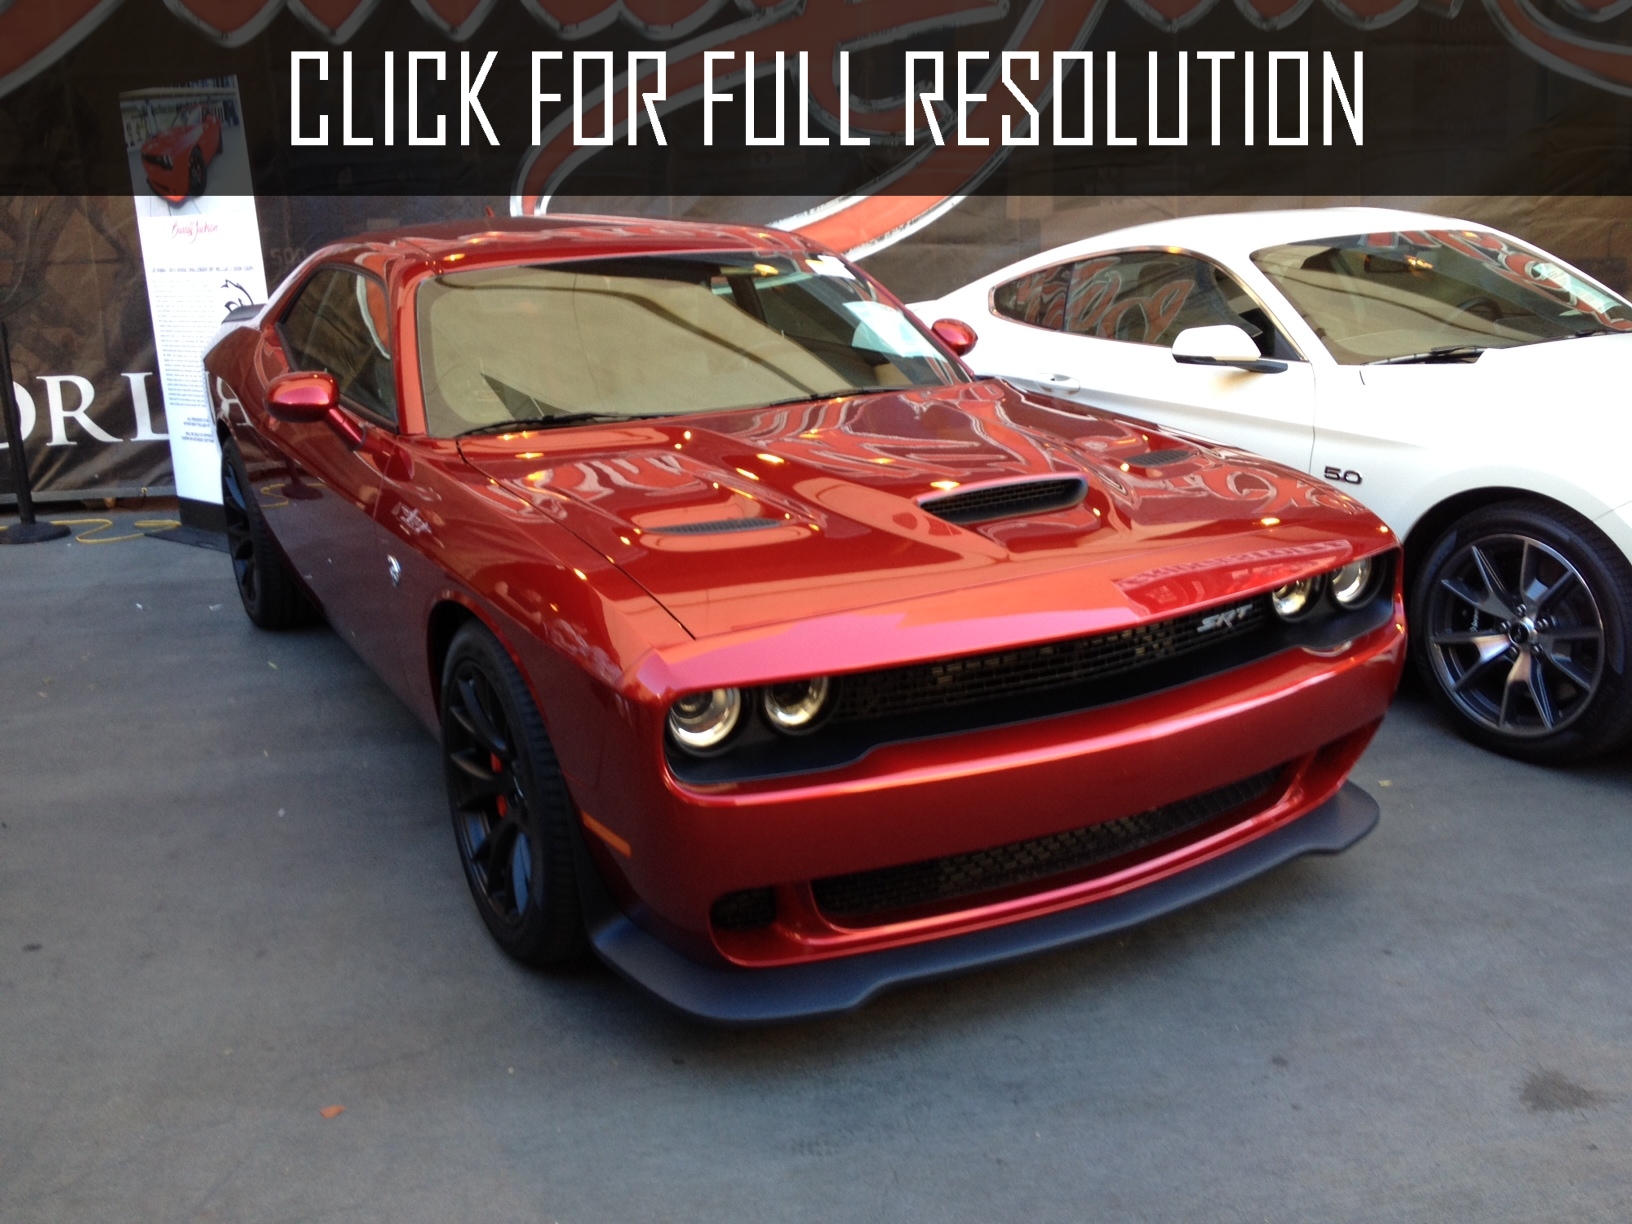 2012 Dodge Challenger Hellcat news, reviews, msrp, ratings with